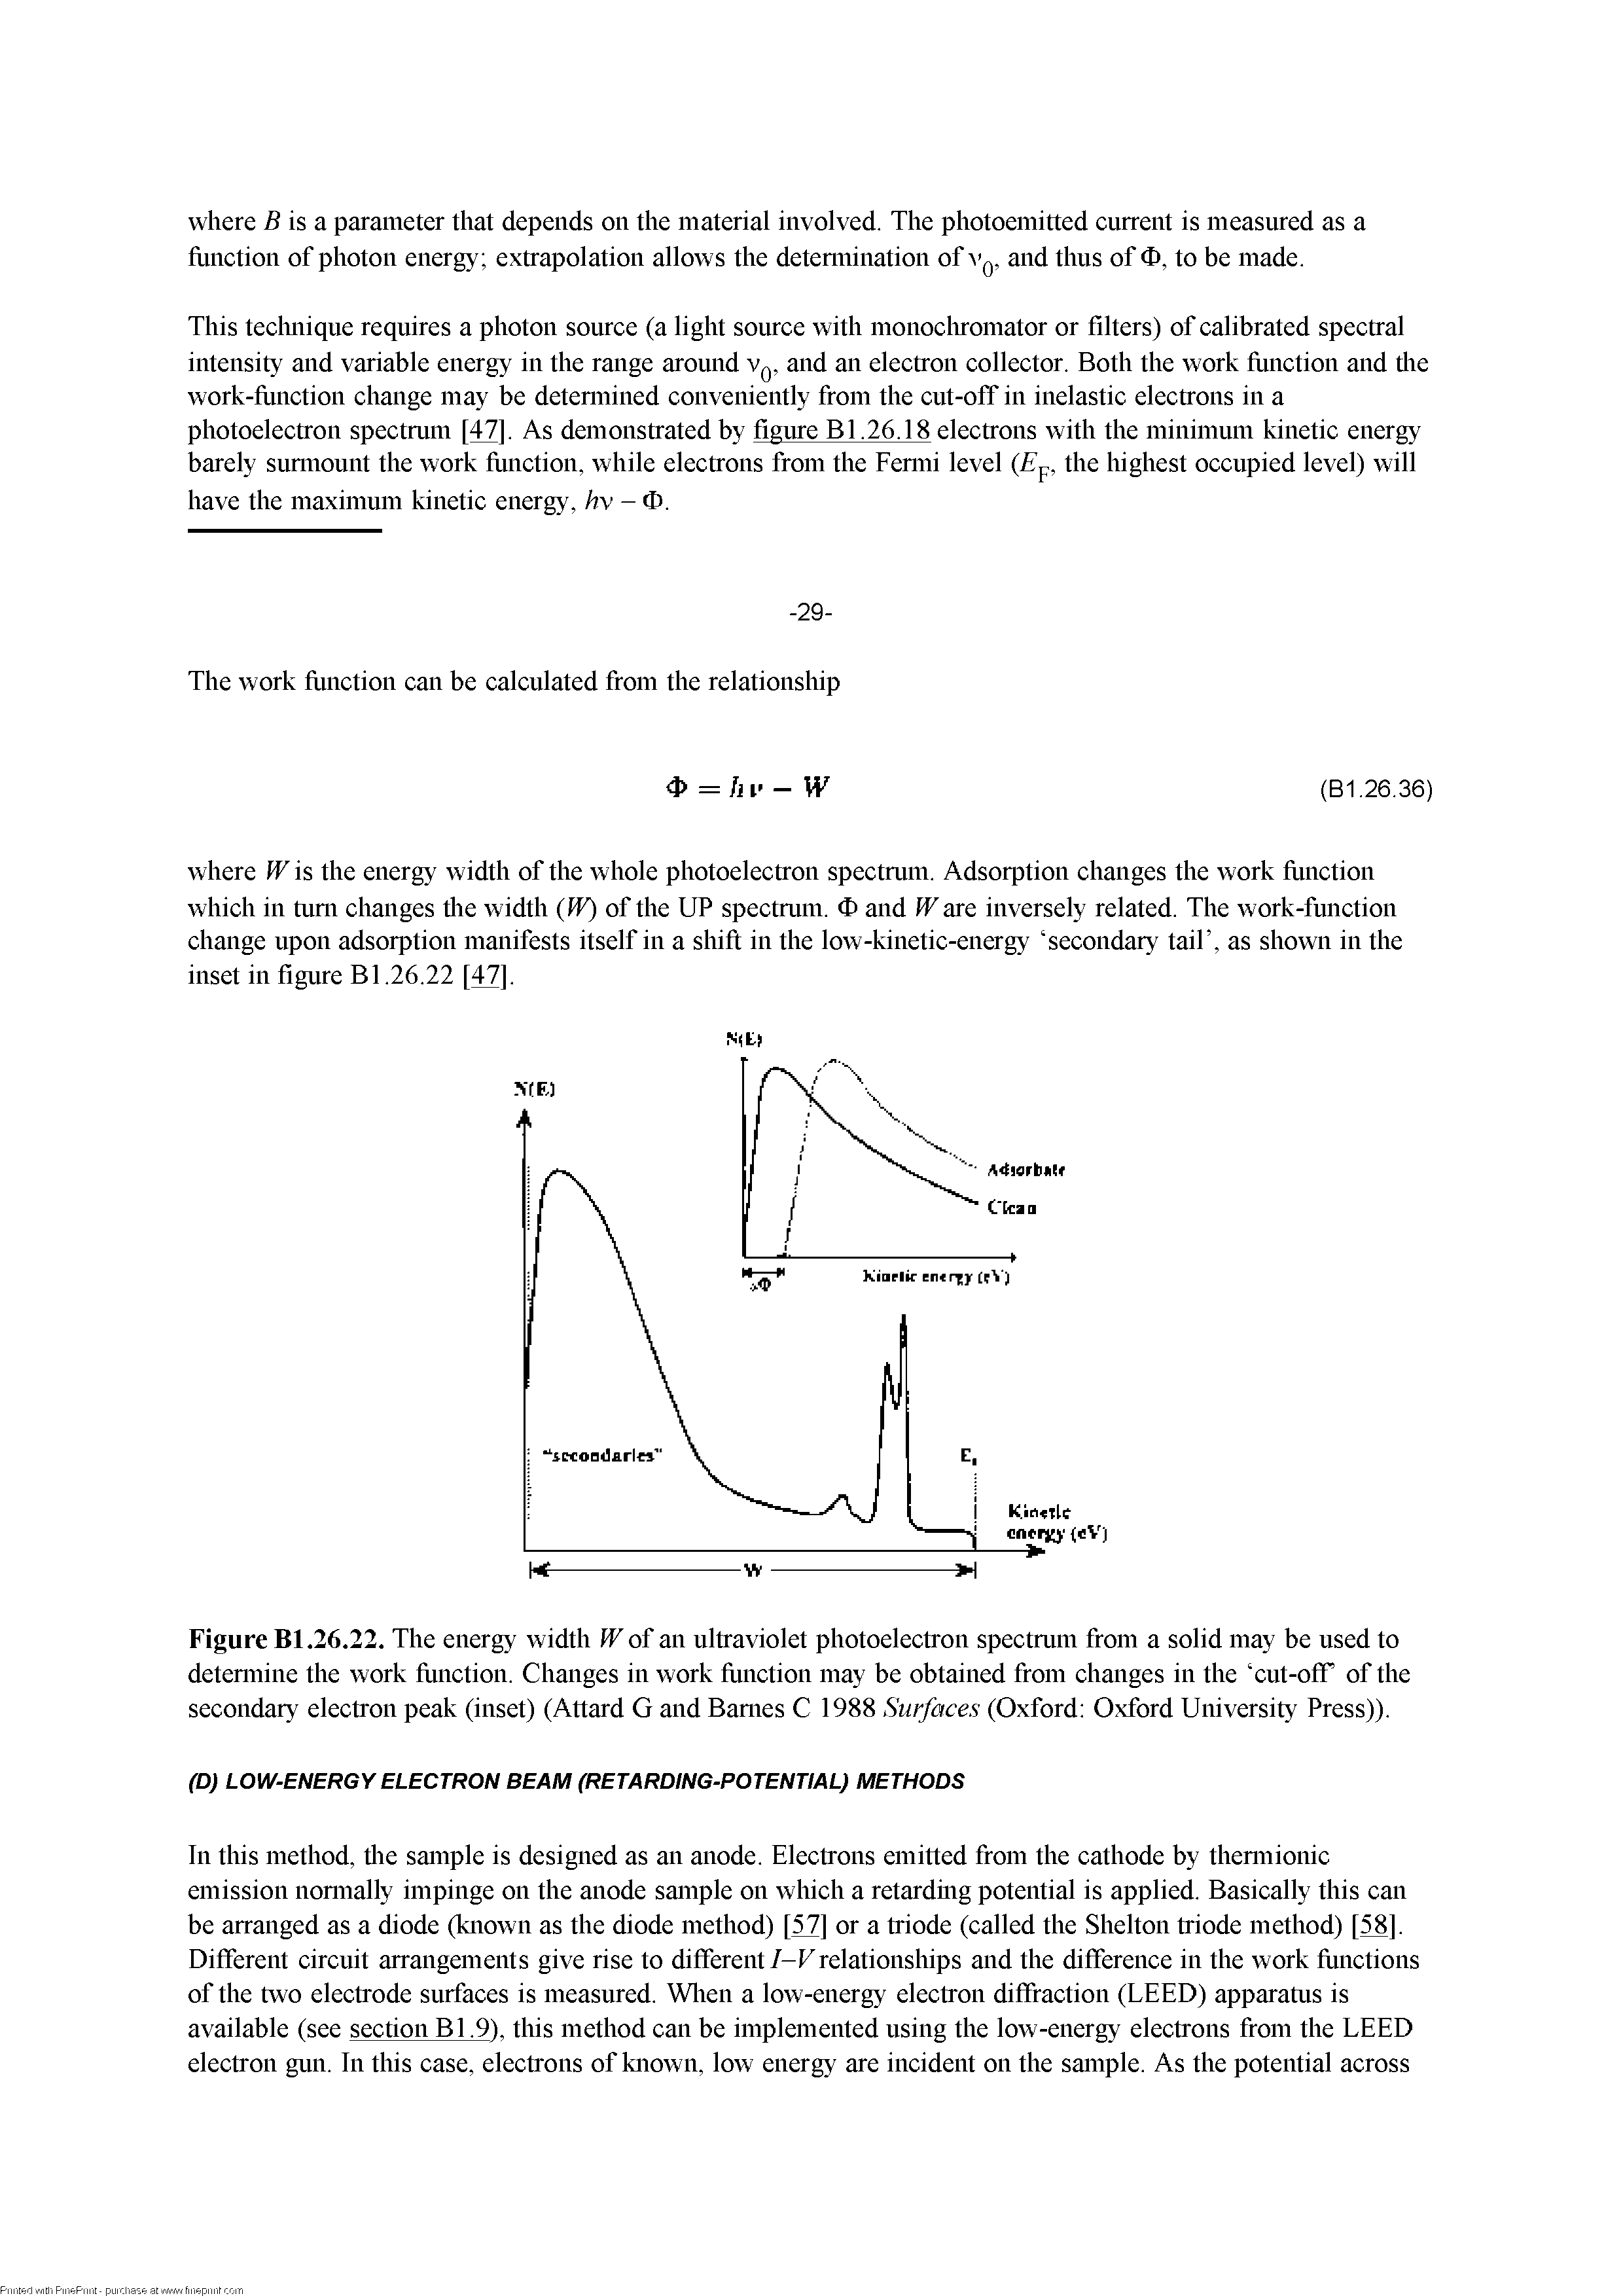 Figure Bl.26.22. The energy width W of an ultraviolet photoelectron spectrum from a solid may be used to detemiine the work fimction. Changes in work fimction may be obtained from changes in the cut-off of the secondary electron peak (inset) (Attard G and Bames C 1988 Surfaces (Oxford Oxford University Press)).